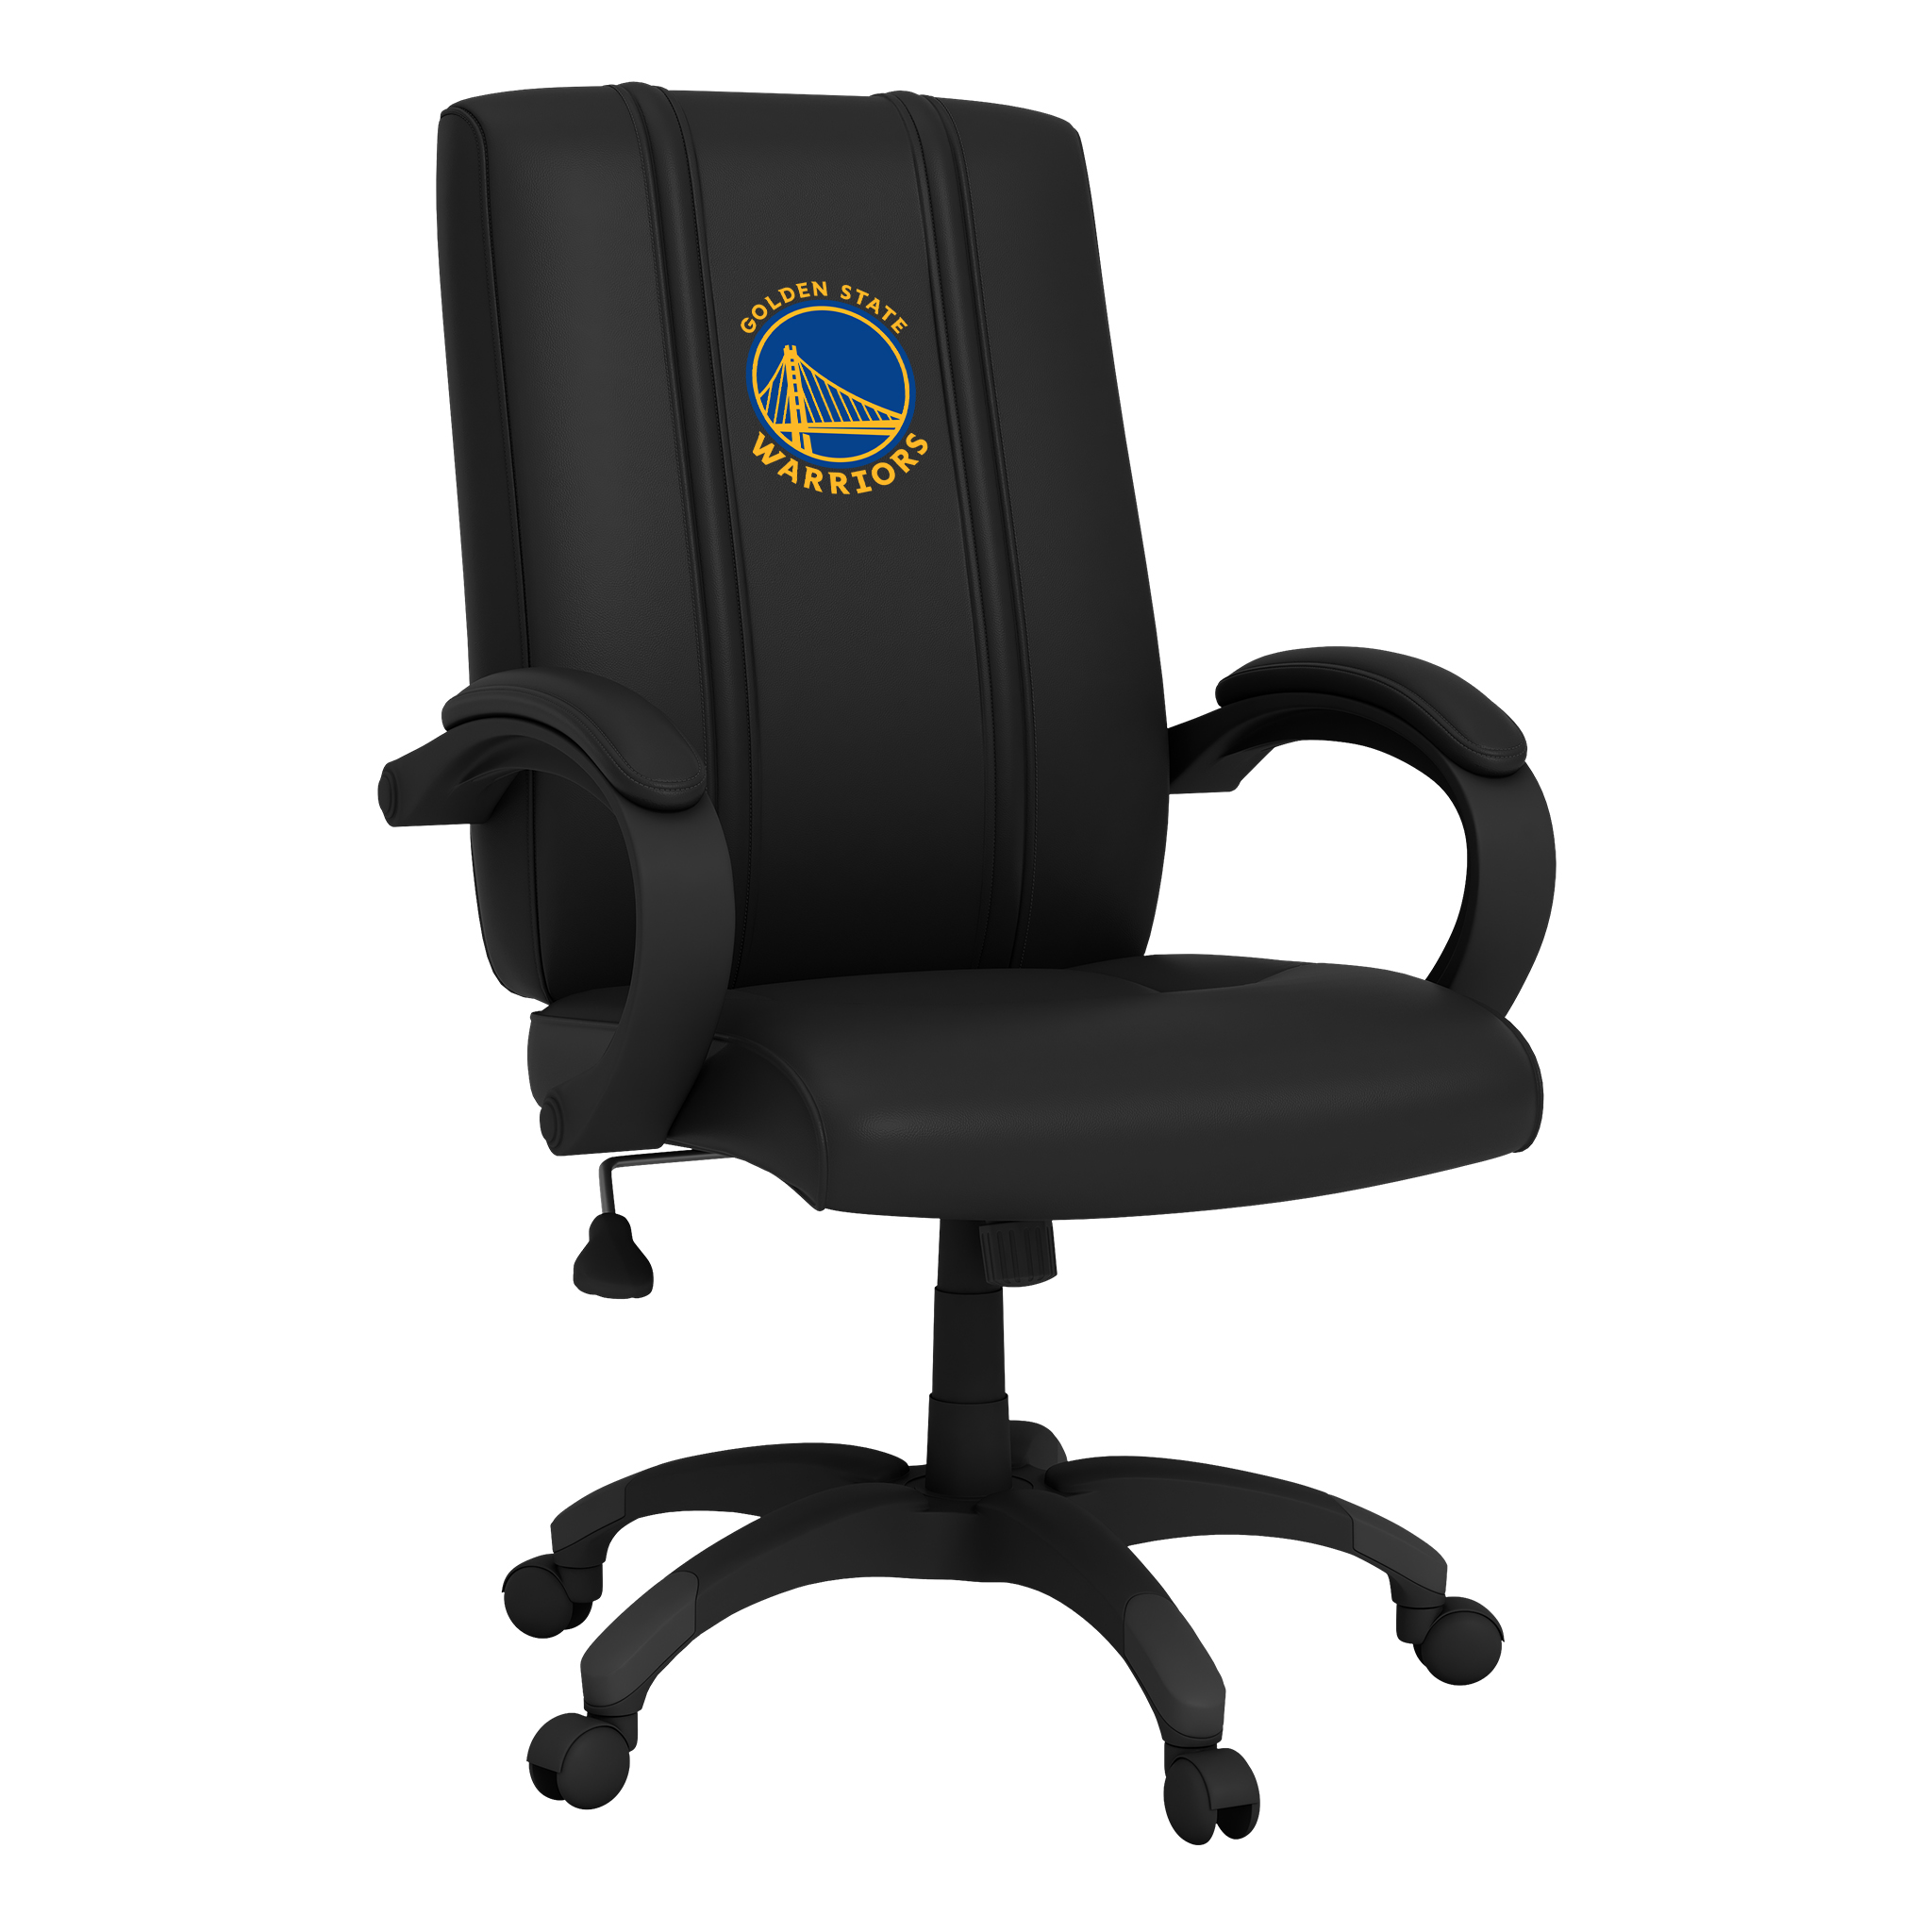 Golden State Warriors Office Chair 1000 with Golden State Warriors Global Logo